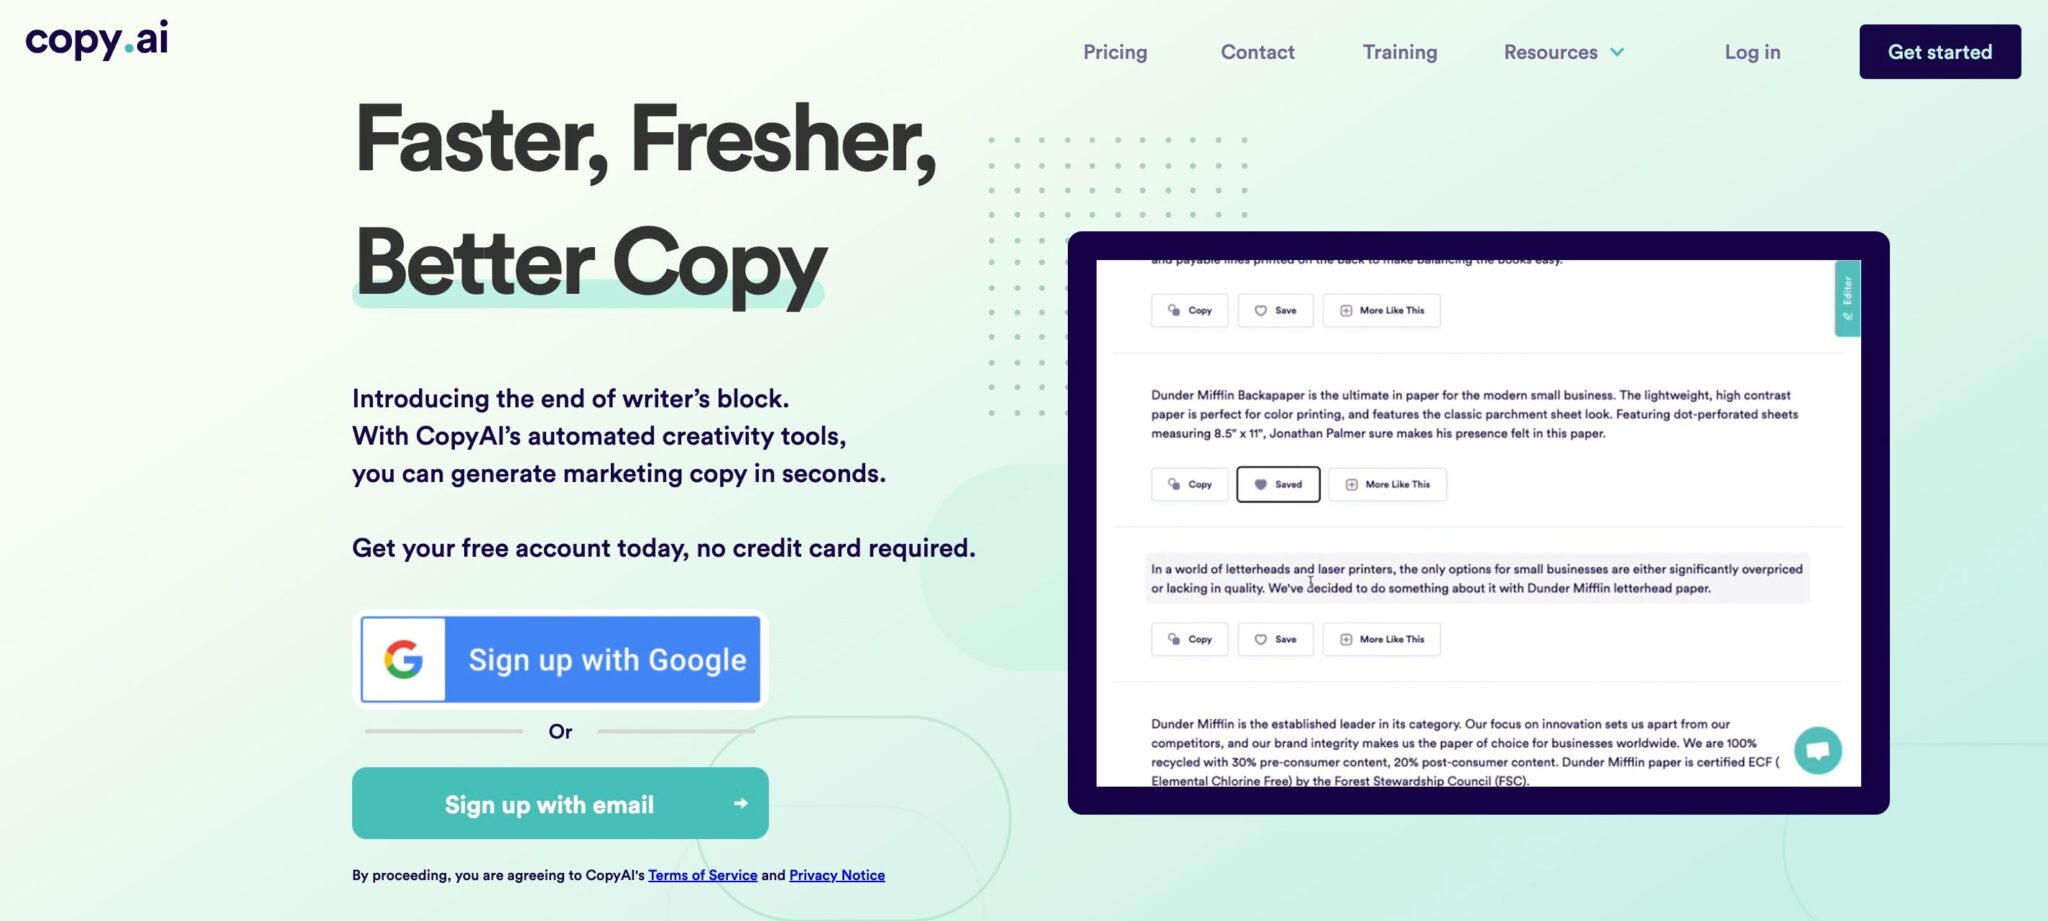 Copy AI Content writing tool homepage